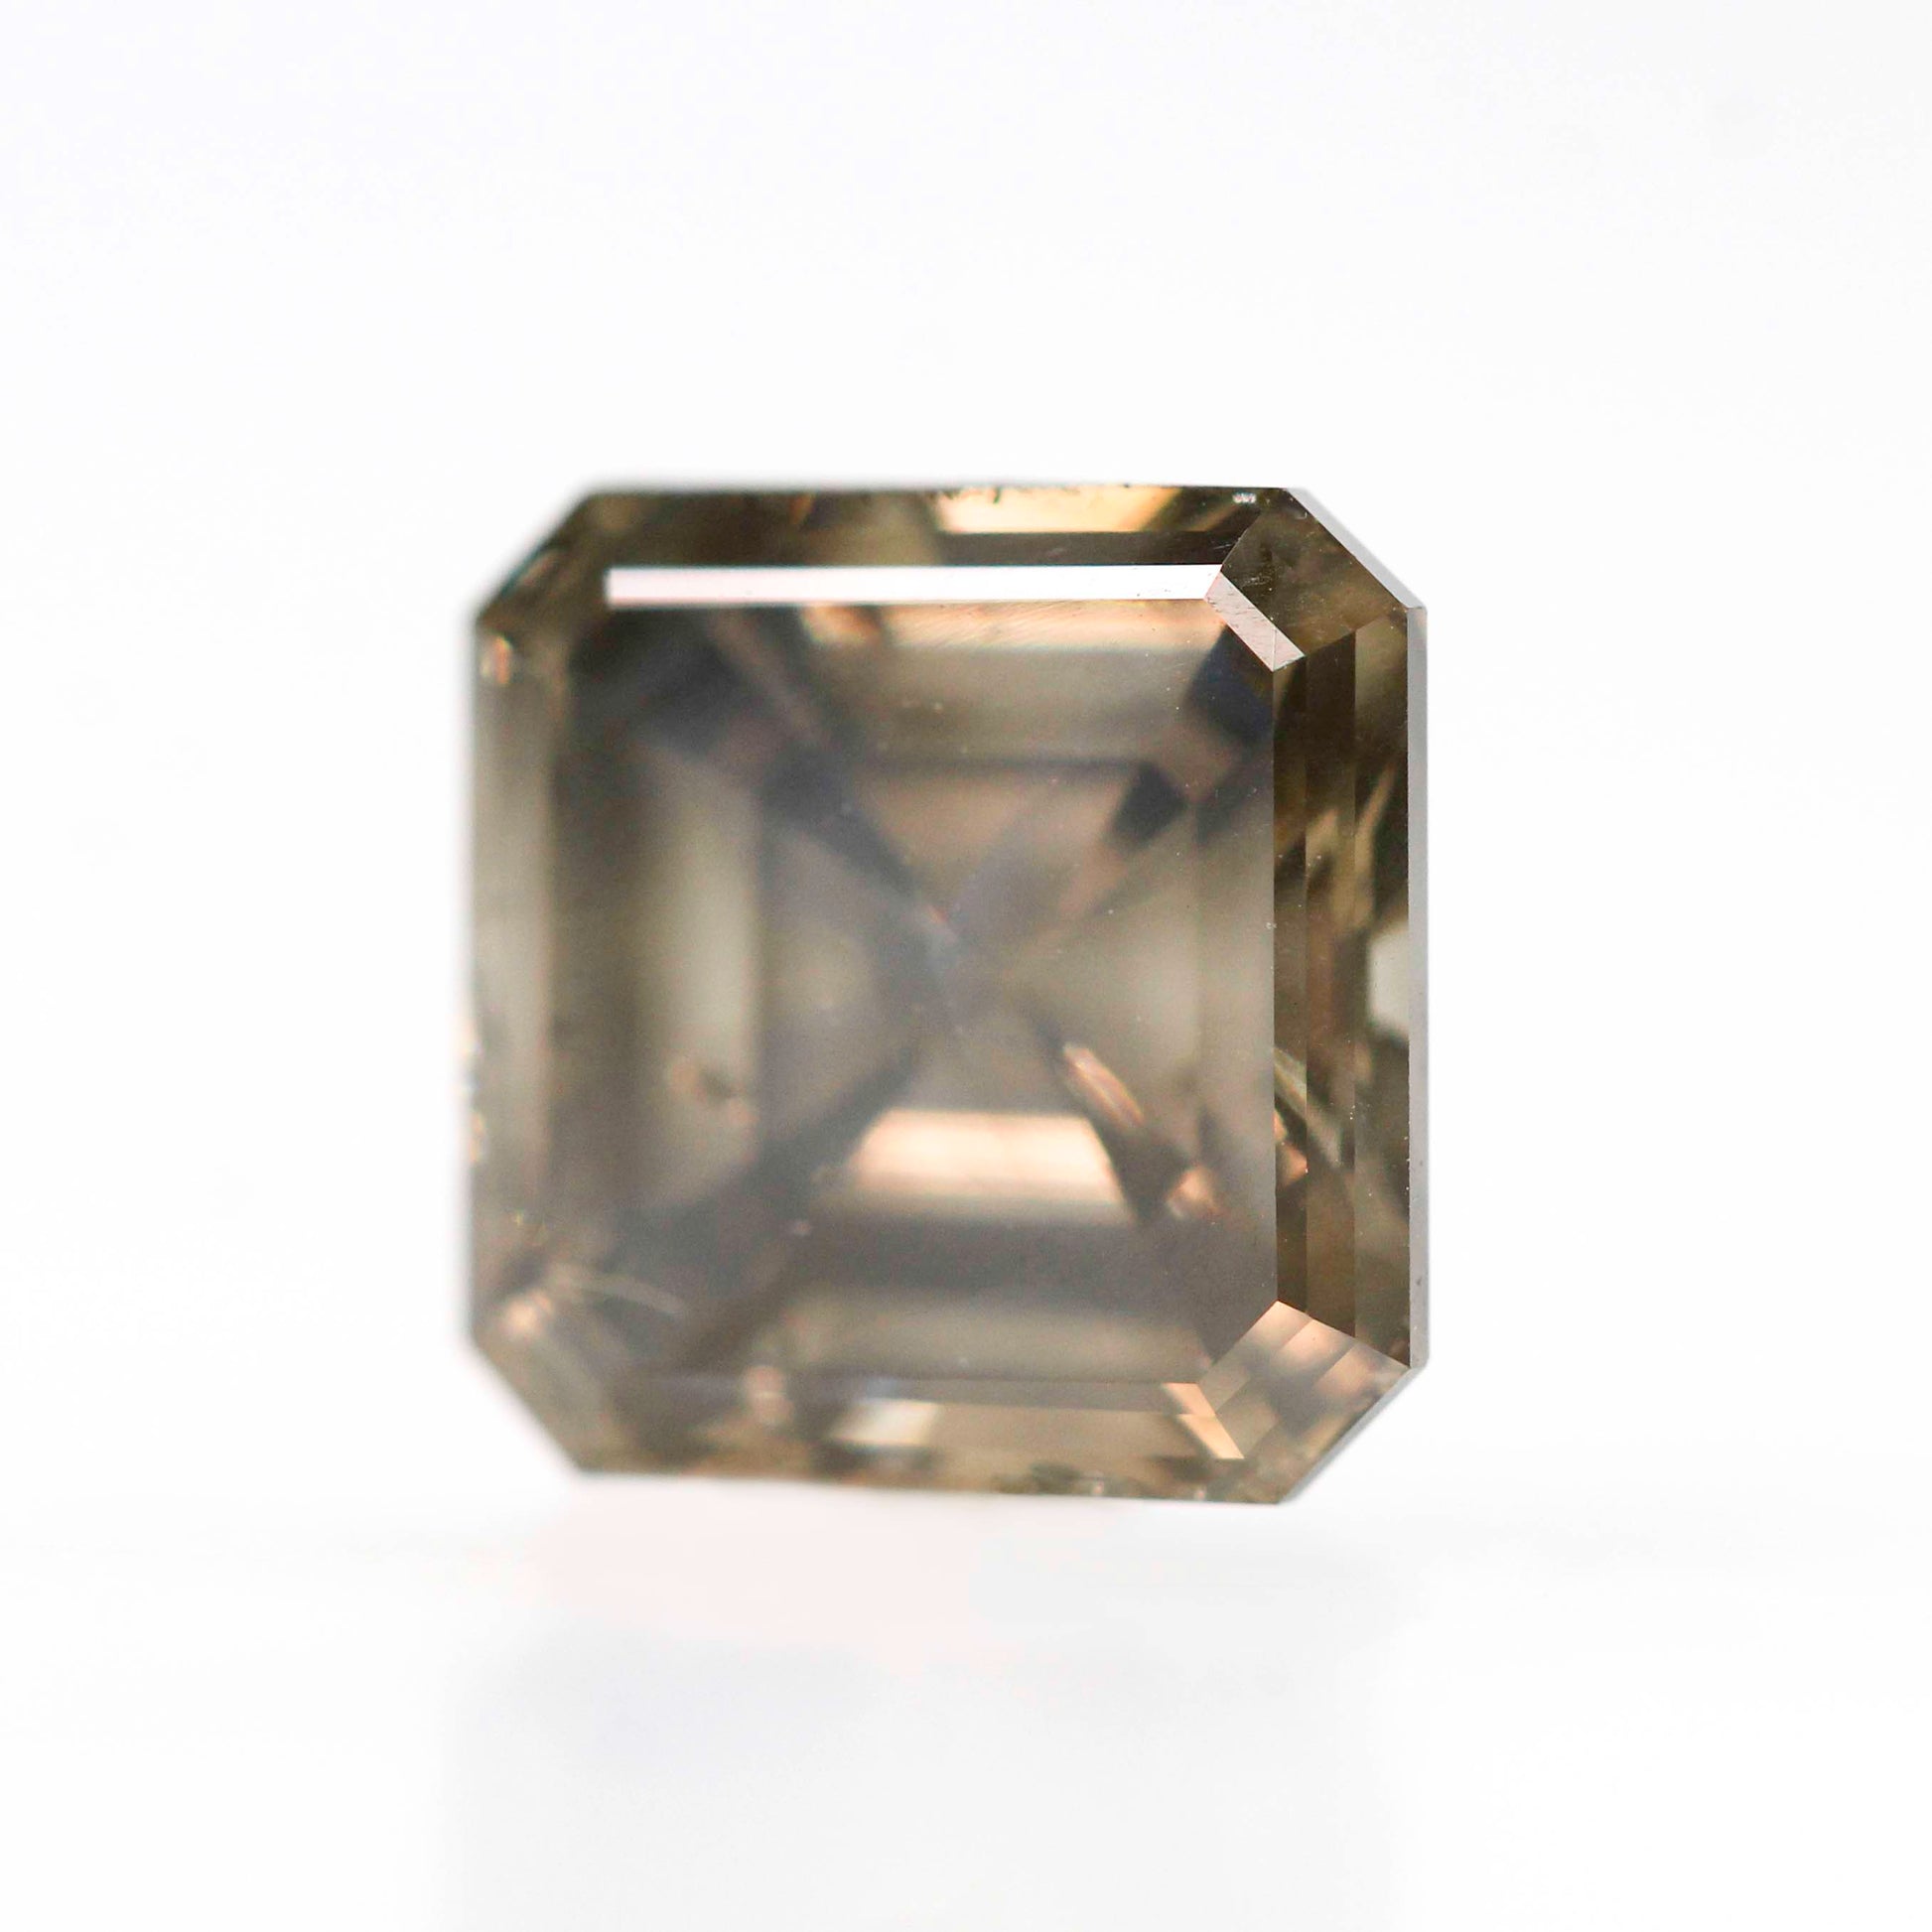 2.64 Carat Champagne Asscher Cut Diamond for Custom Work - Inventory Code SCA264 - Midwinter Co. Alternative Bridal Rings and Modern Fine Jewelry